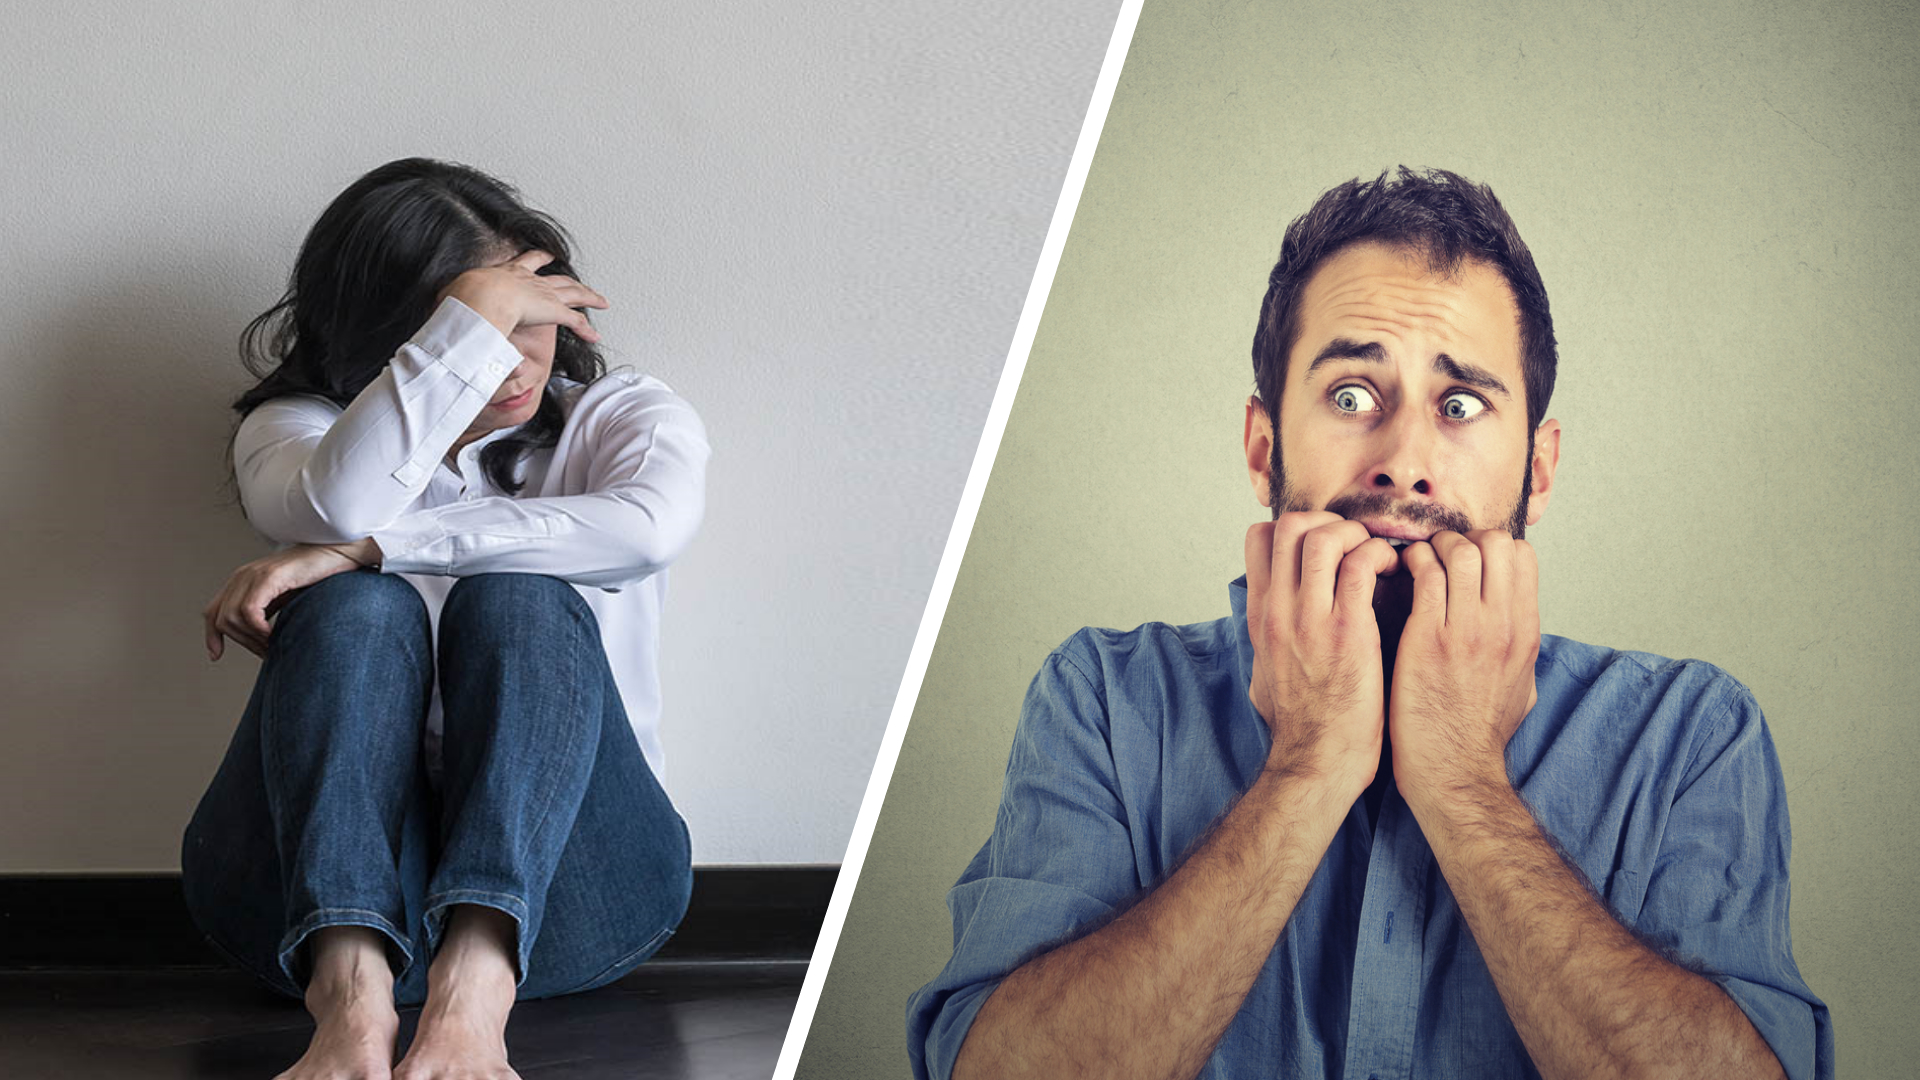 Anxiety Attack and Panic Attack: What’s the Difference?